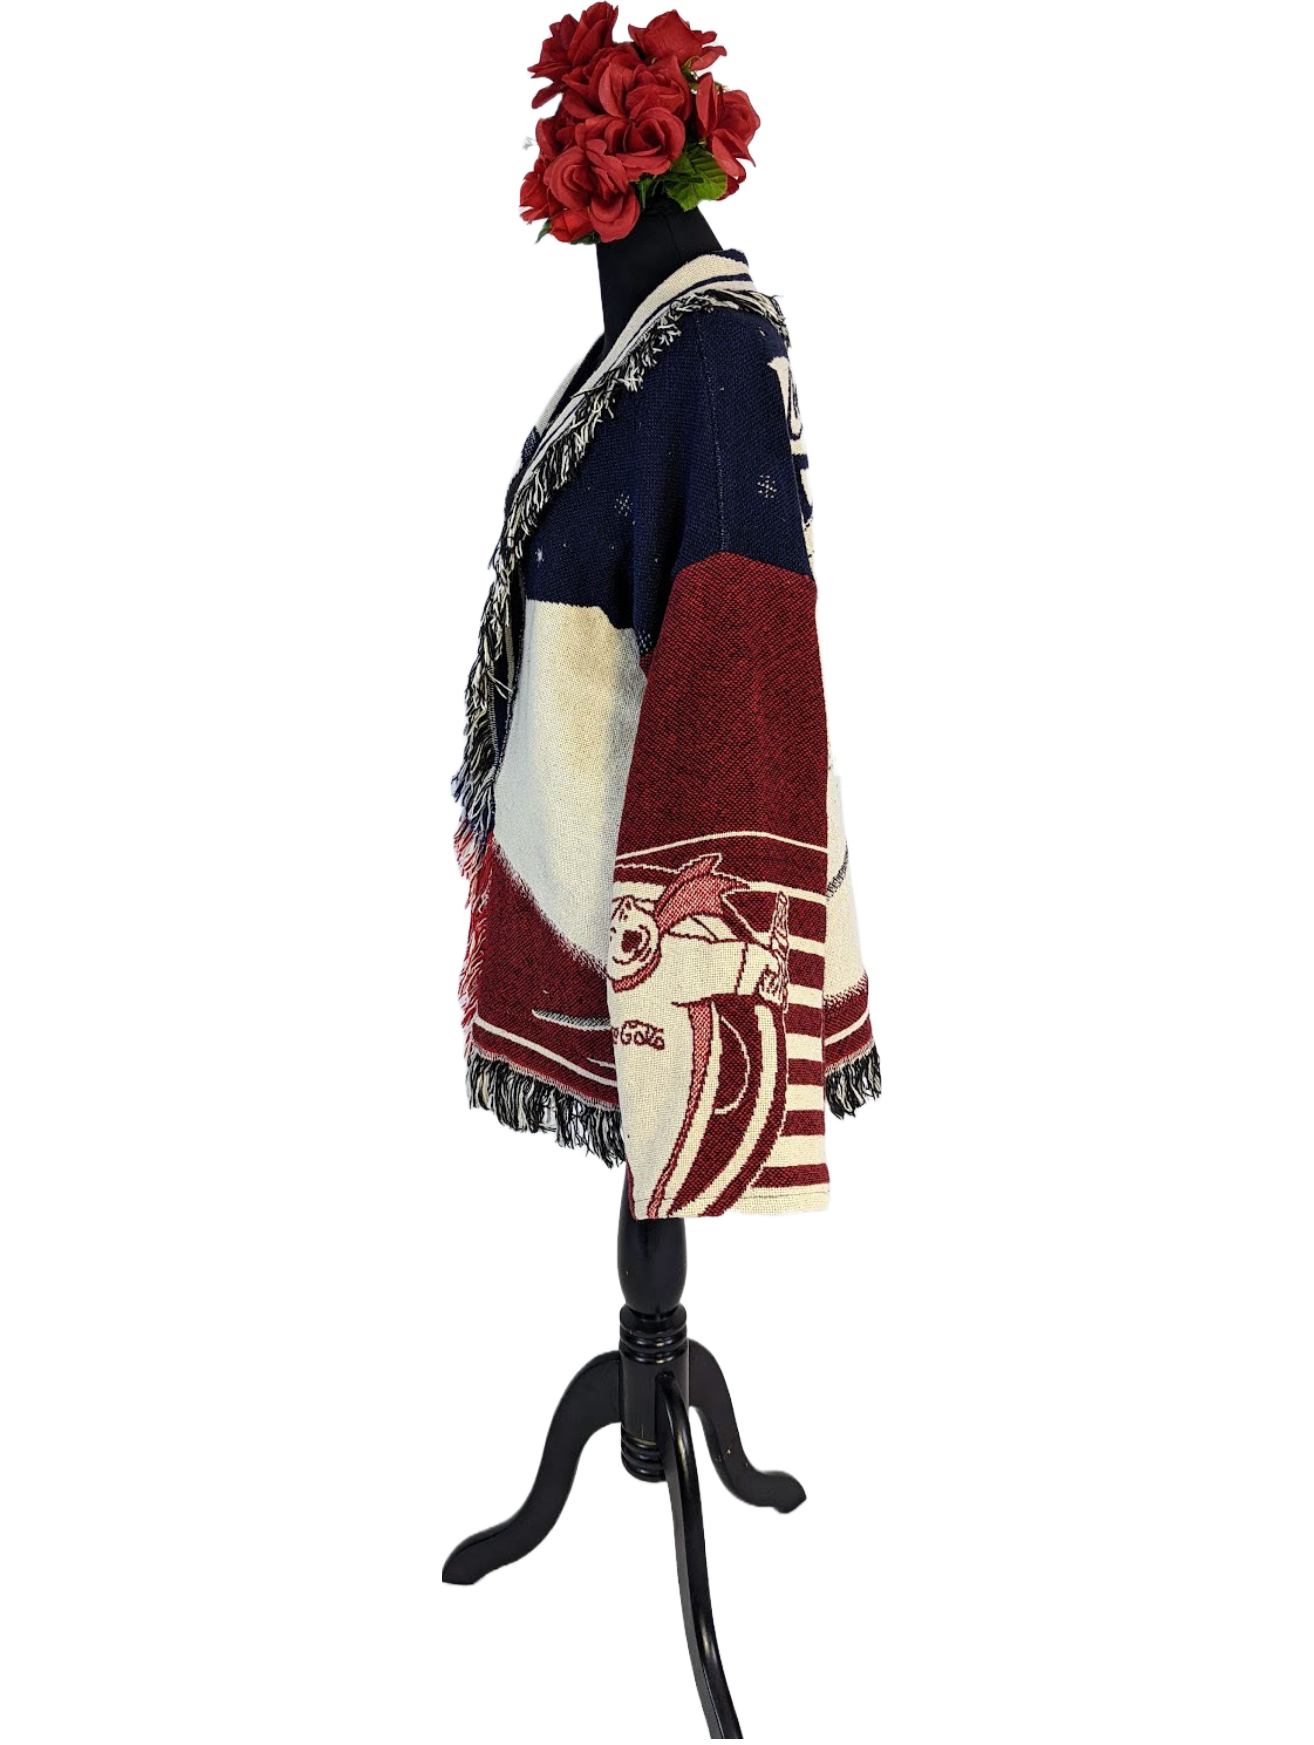 Side view of blue, white and red blanket coat displayed on dress-form.